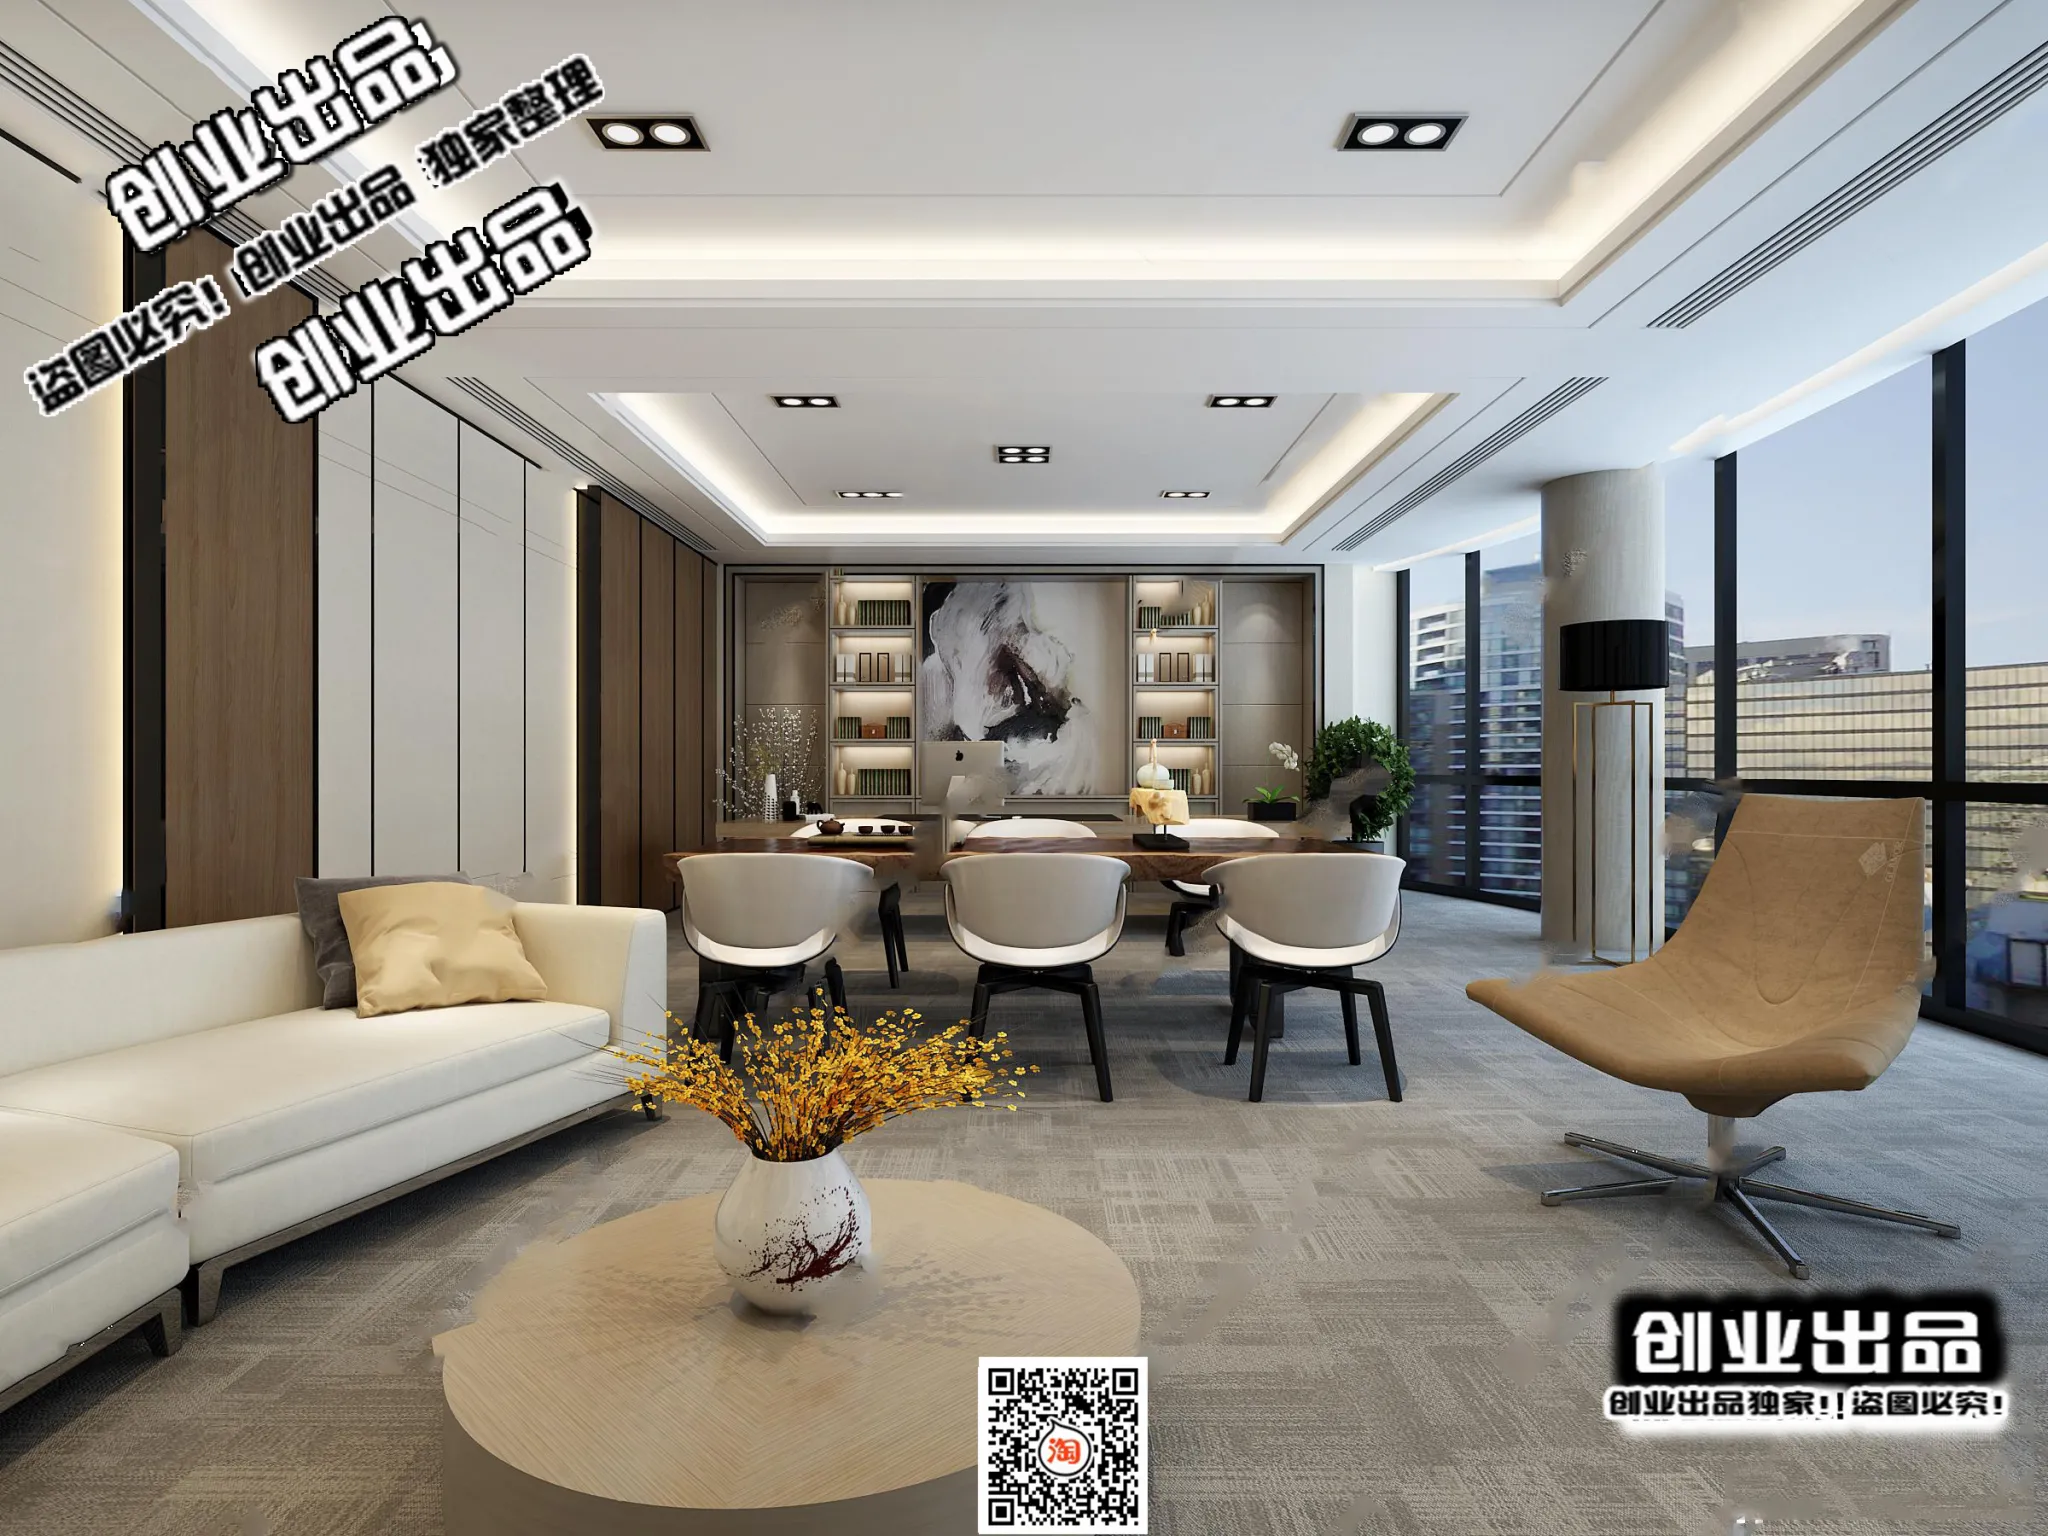 3D OFFICE INTERIOR (VRAY) – MANAGER ROOM 3D SCENES – 072